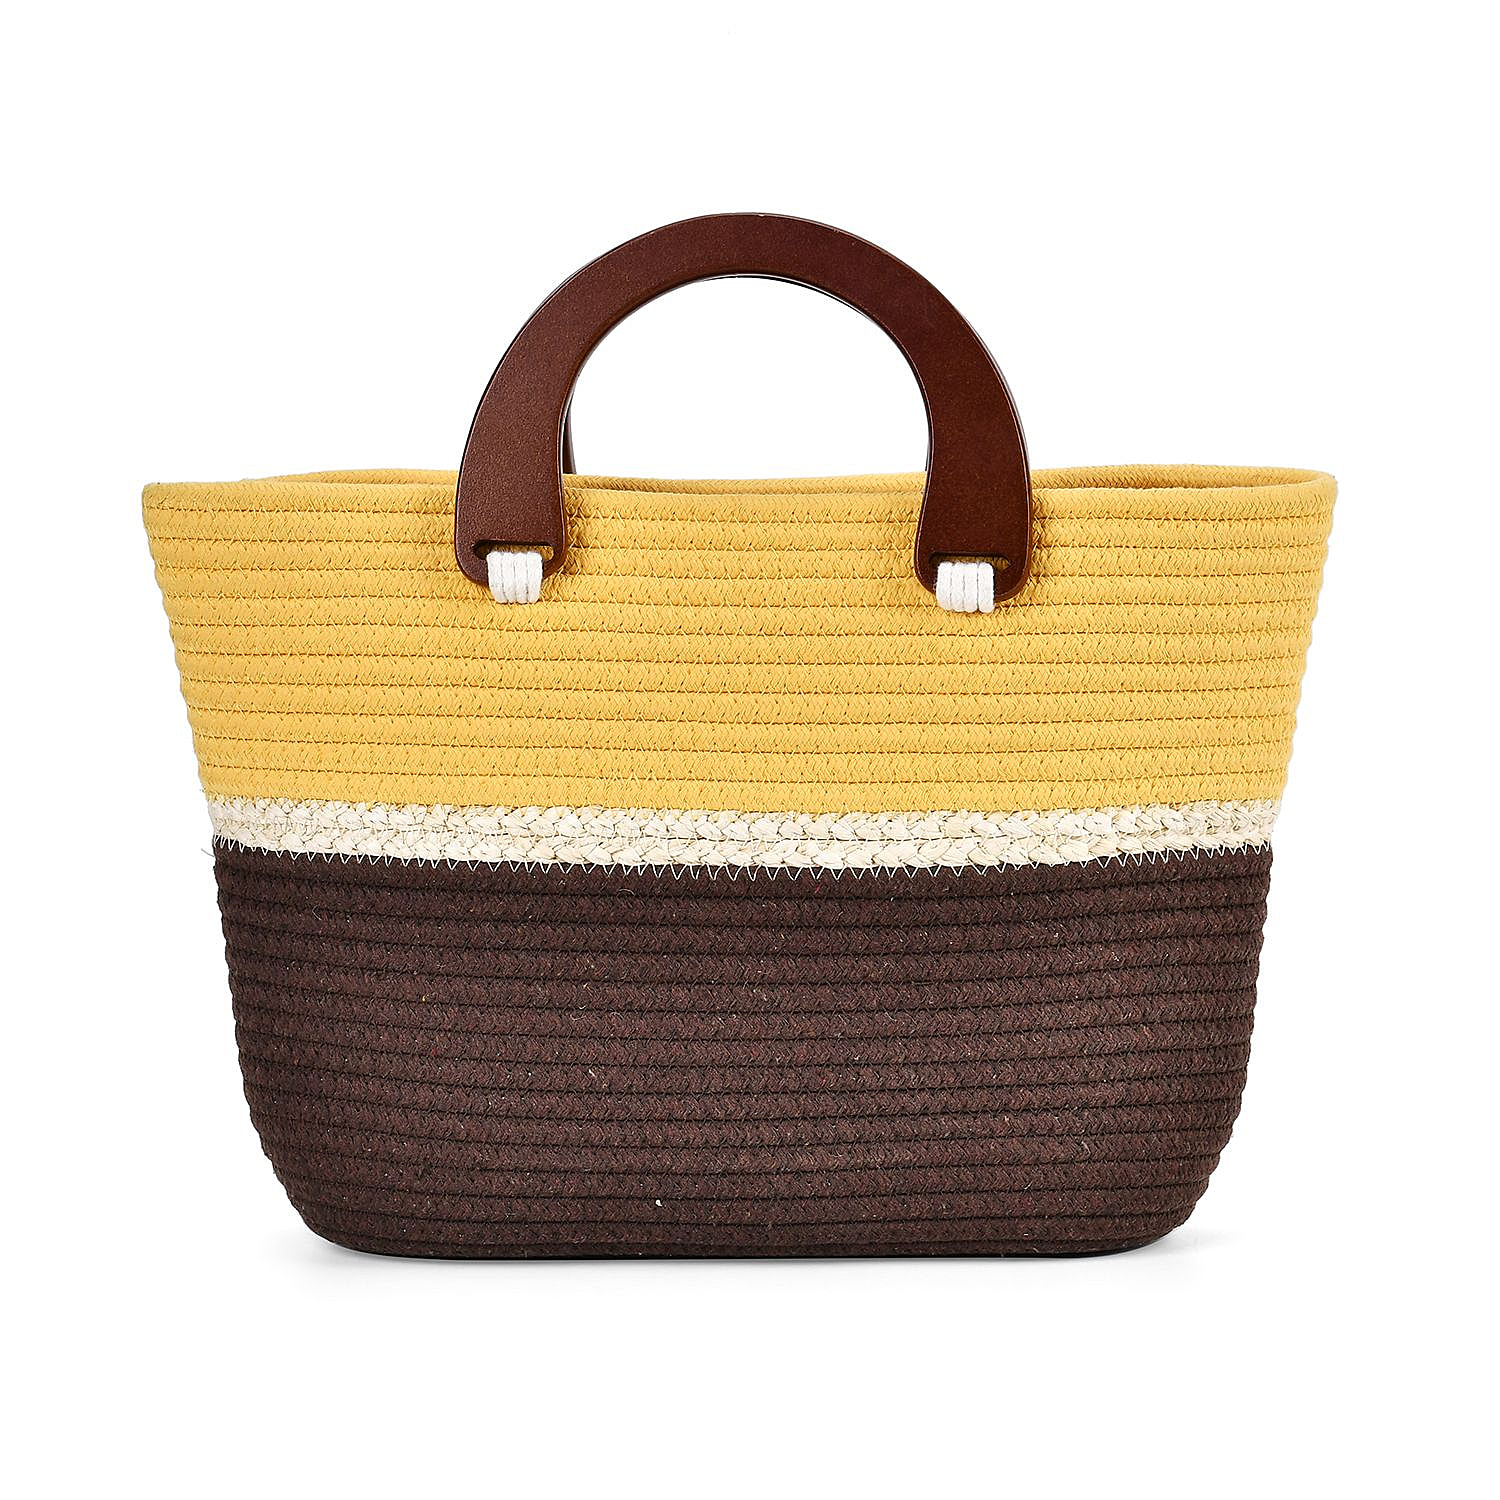 Cotton Patterned Tote Bag - Yellow and Brown